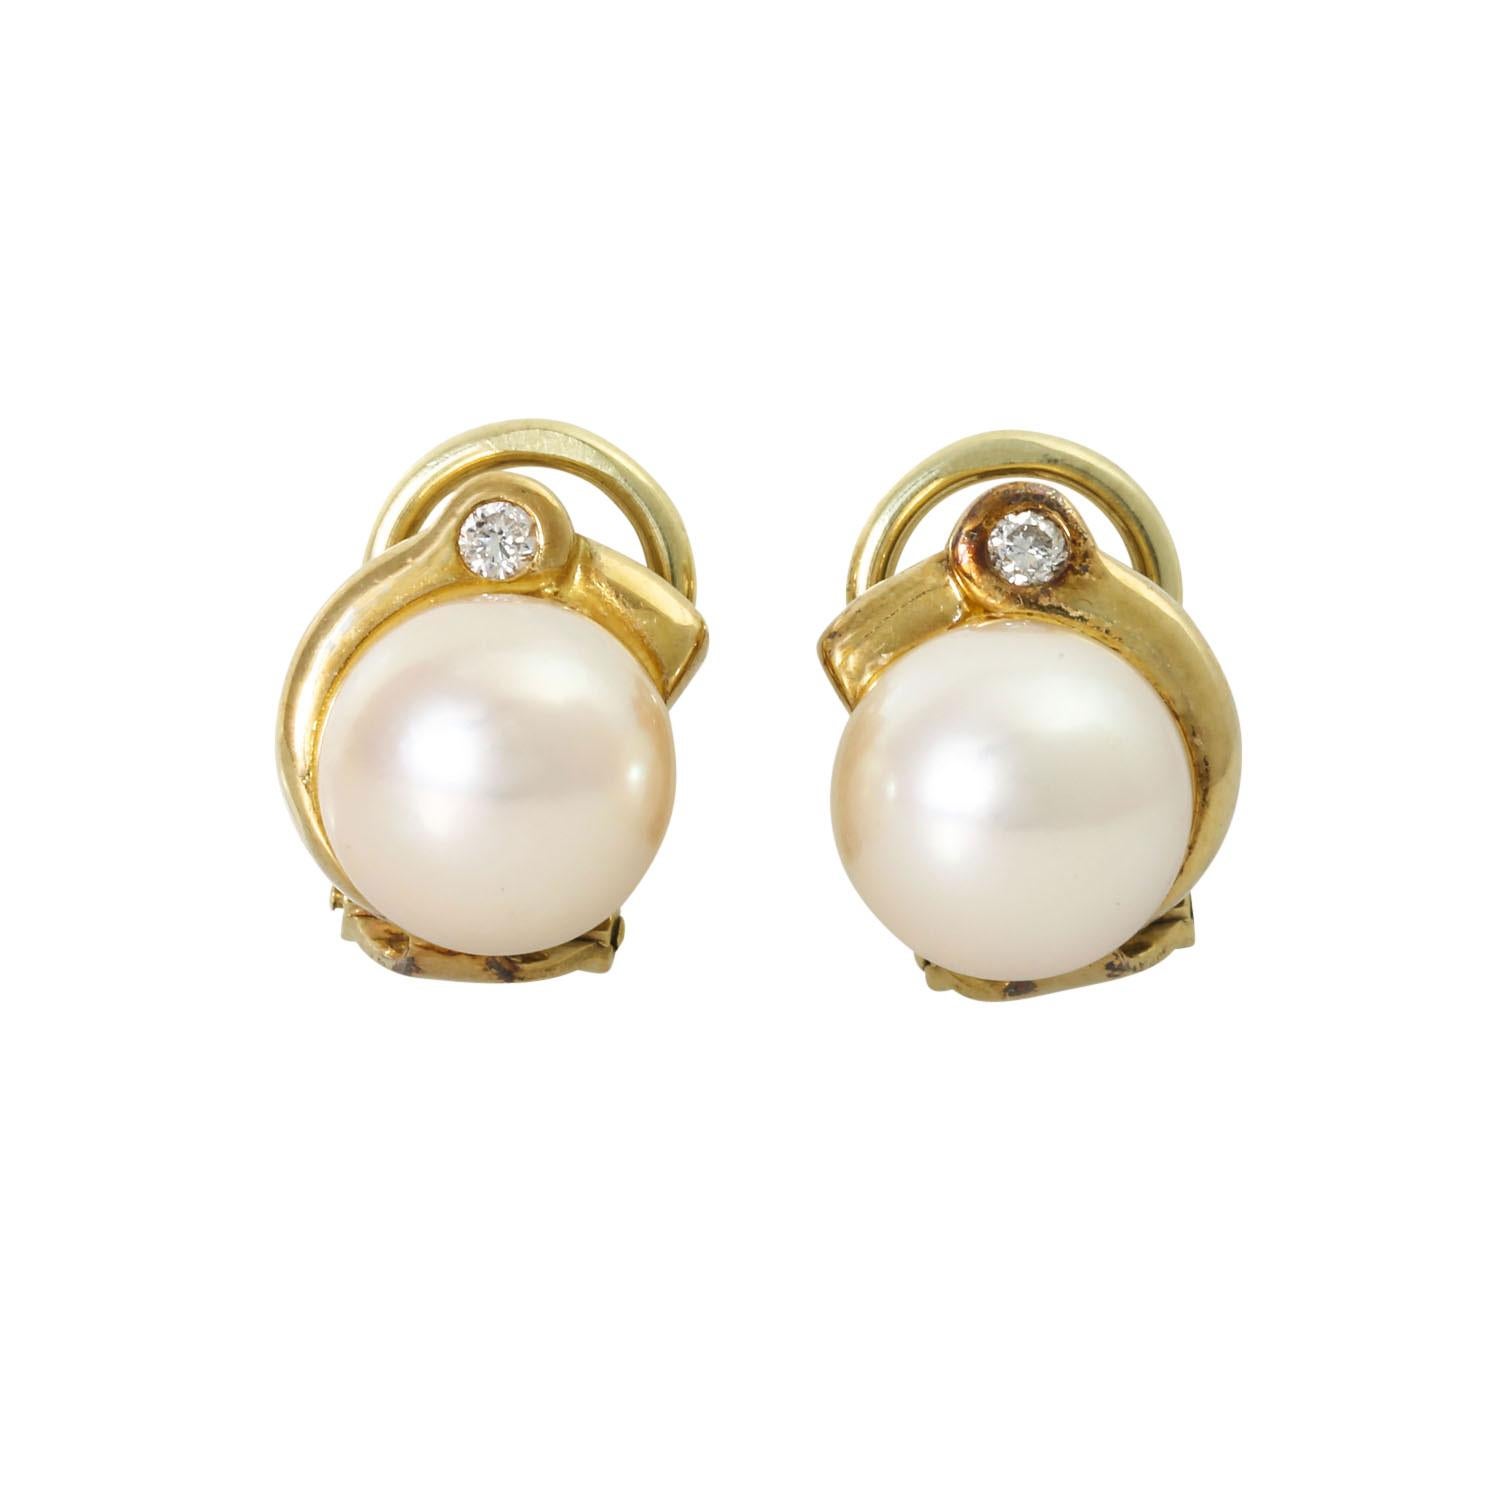 Modern Jewelry Set Ring and Ear Clips with Pearls and Brilliant-Cut Diamonds Total For Sale